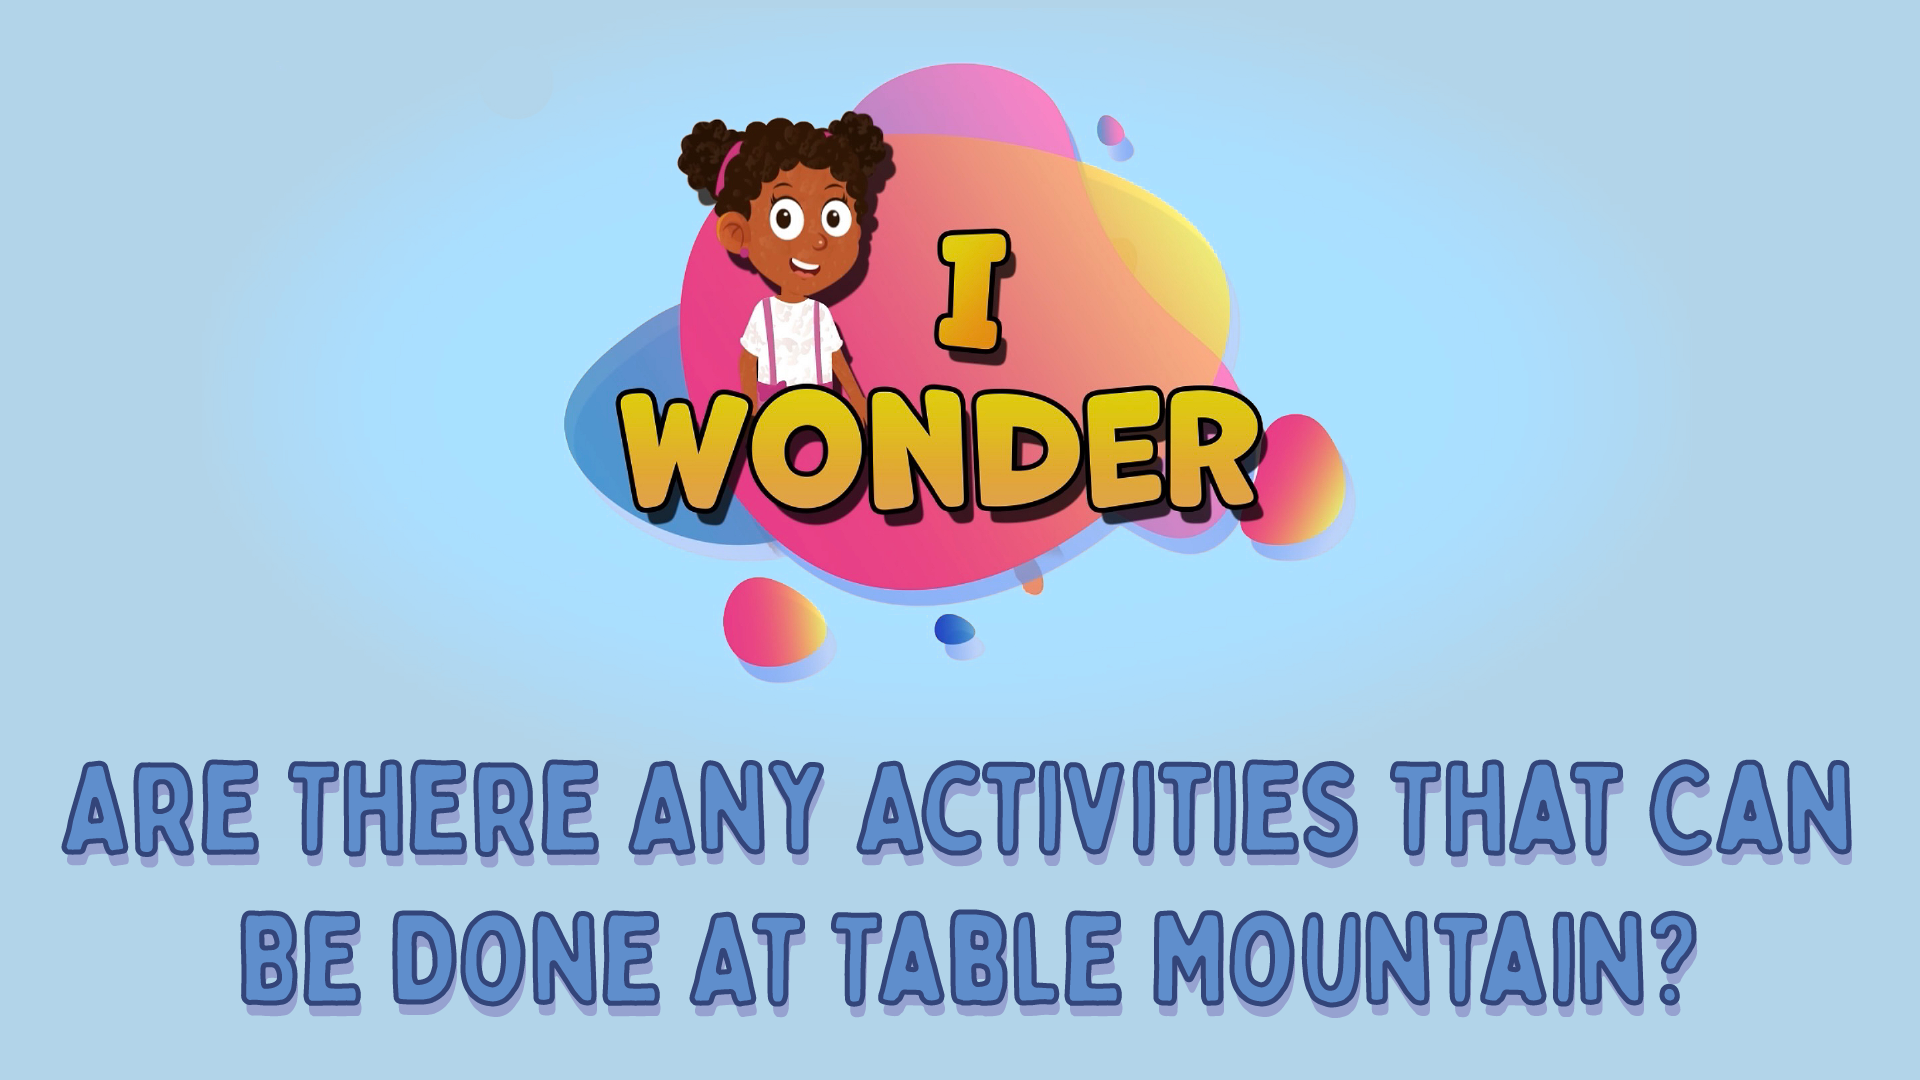 Are There Any Activities That Can Be Done At Table Mountain?